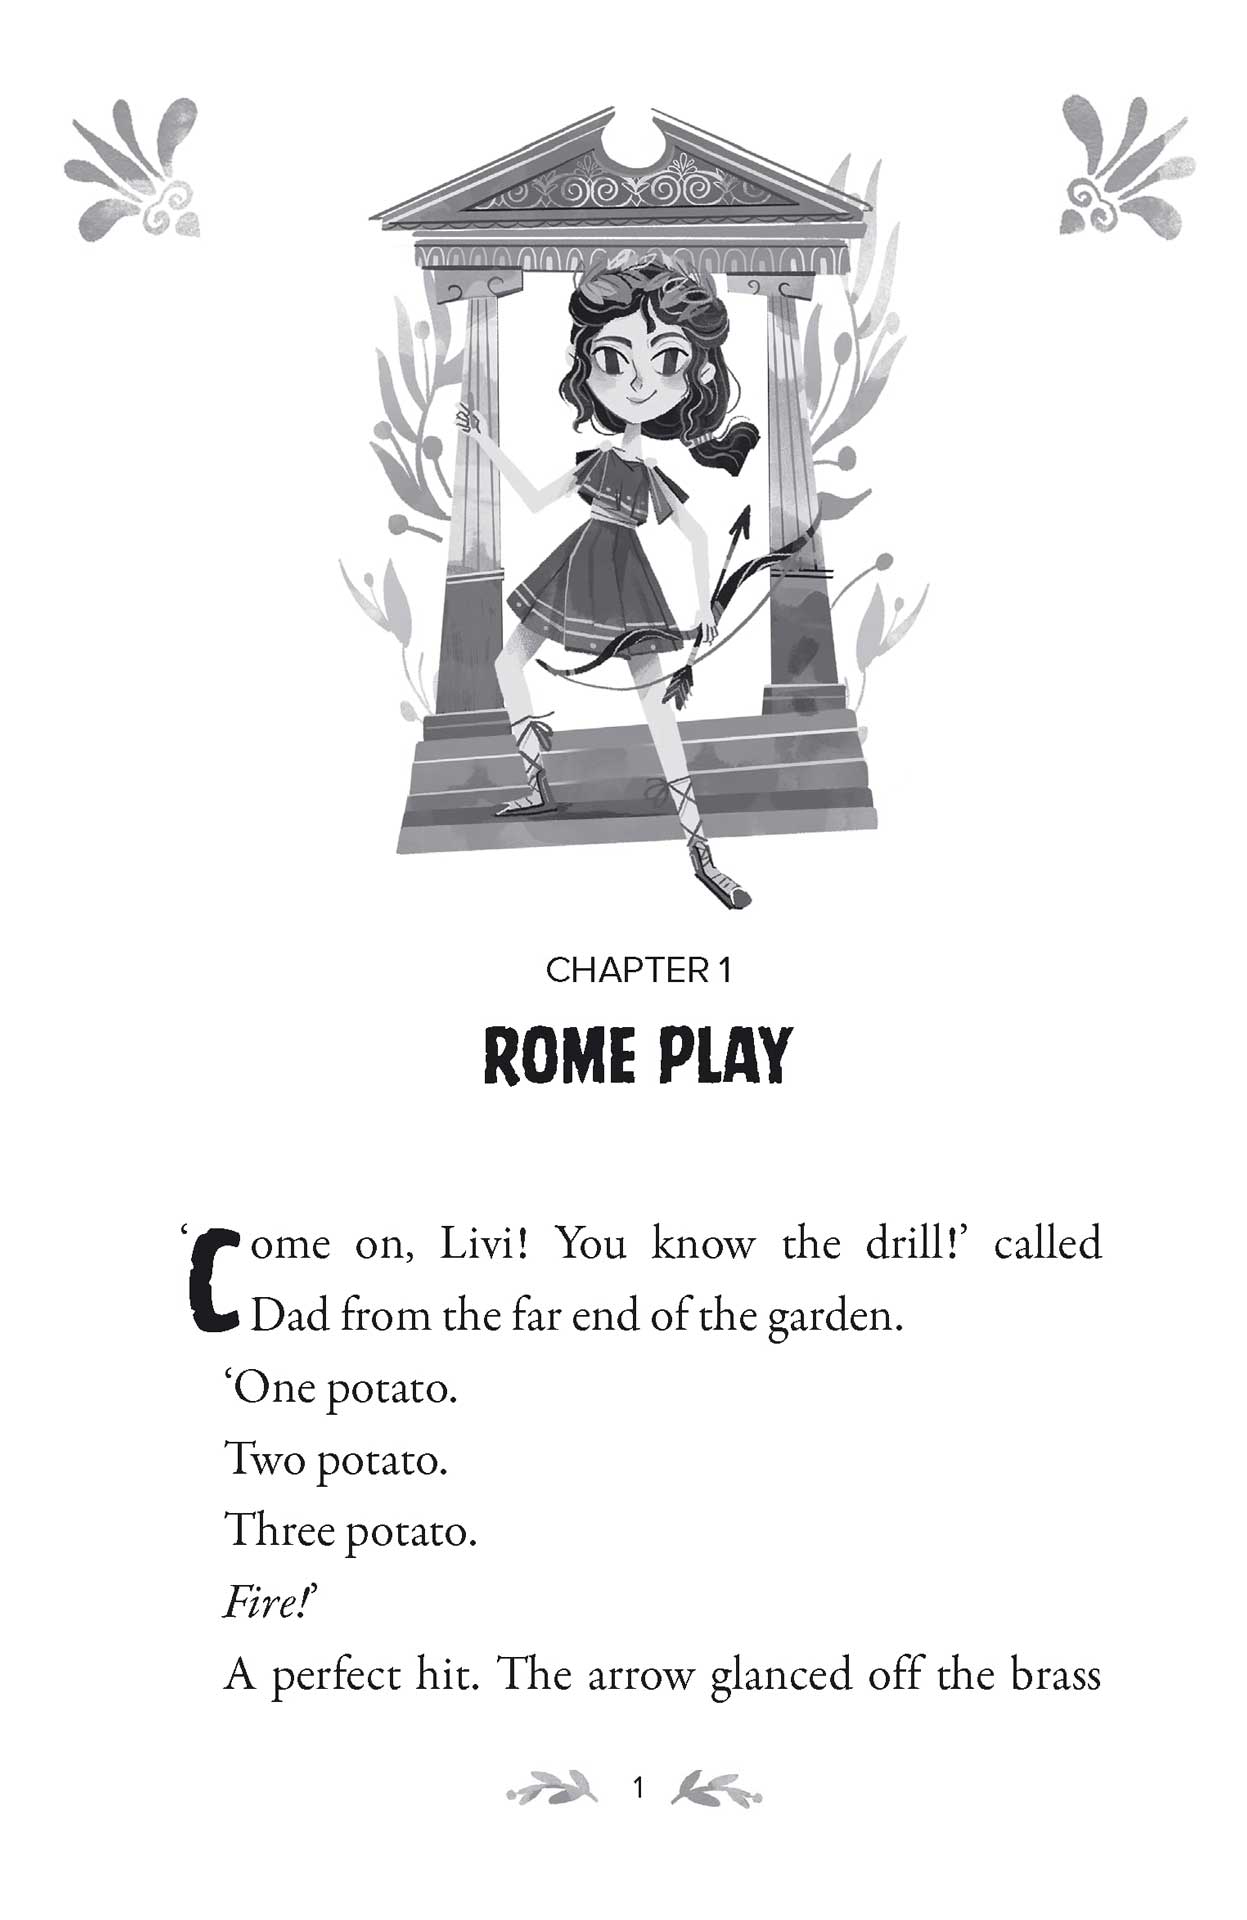 My Family and Other Romans by Marie Basting spread